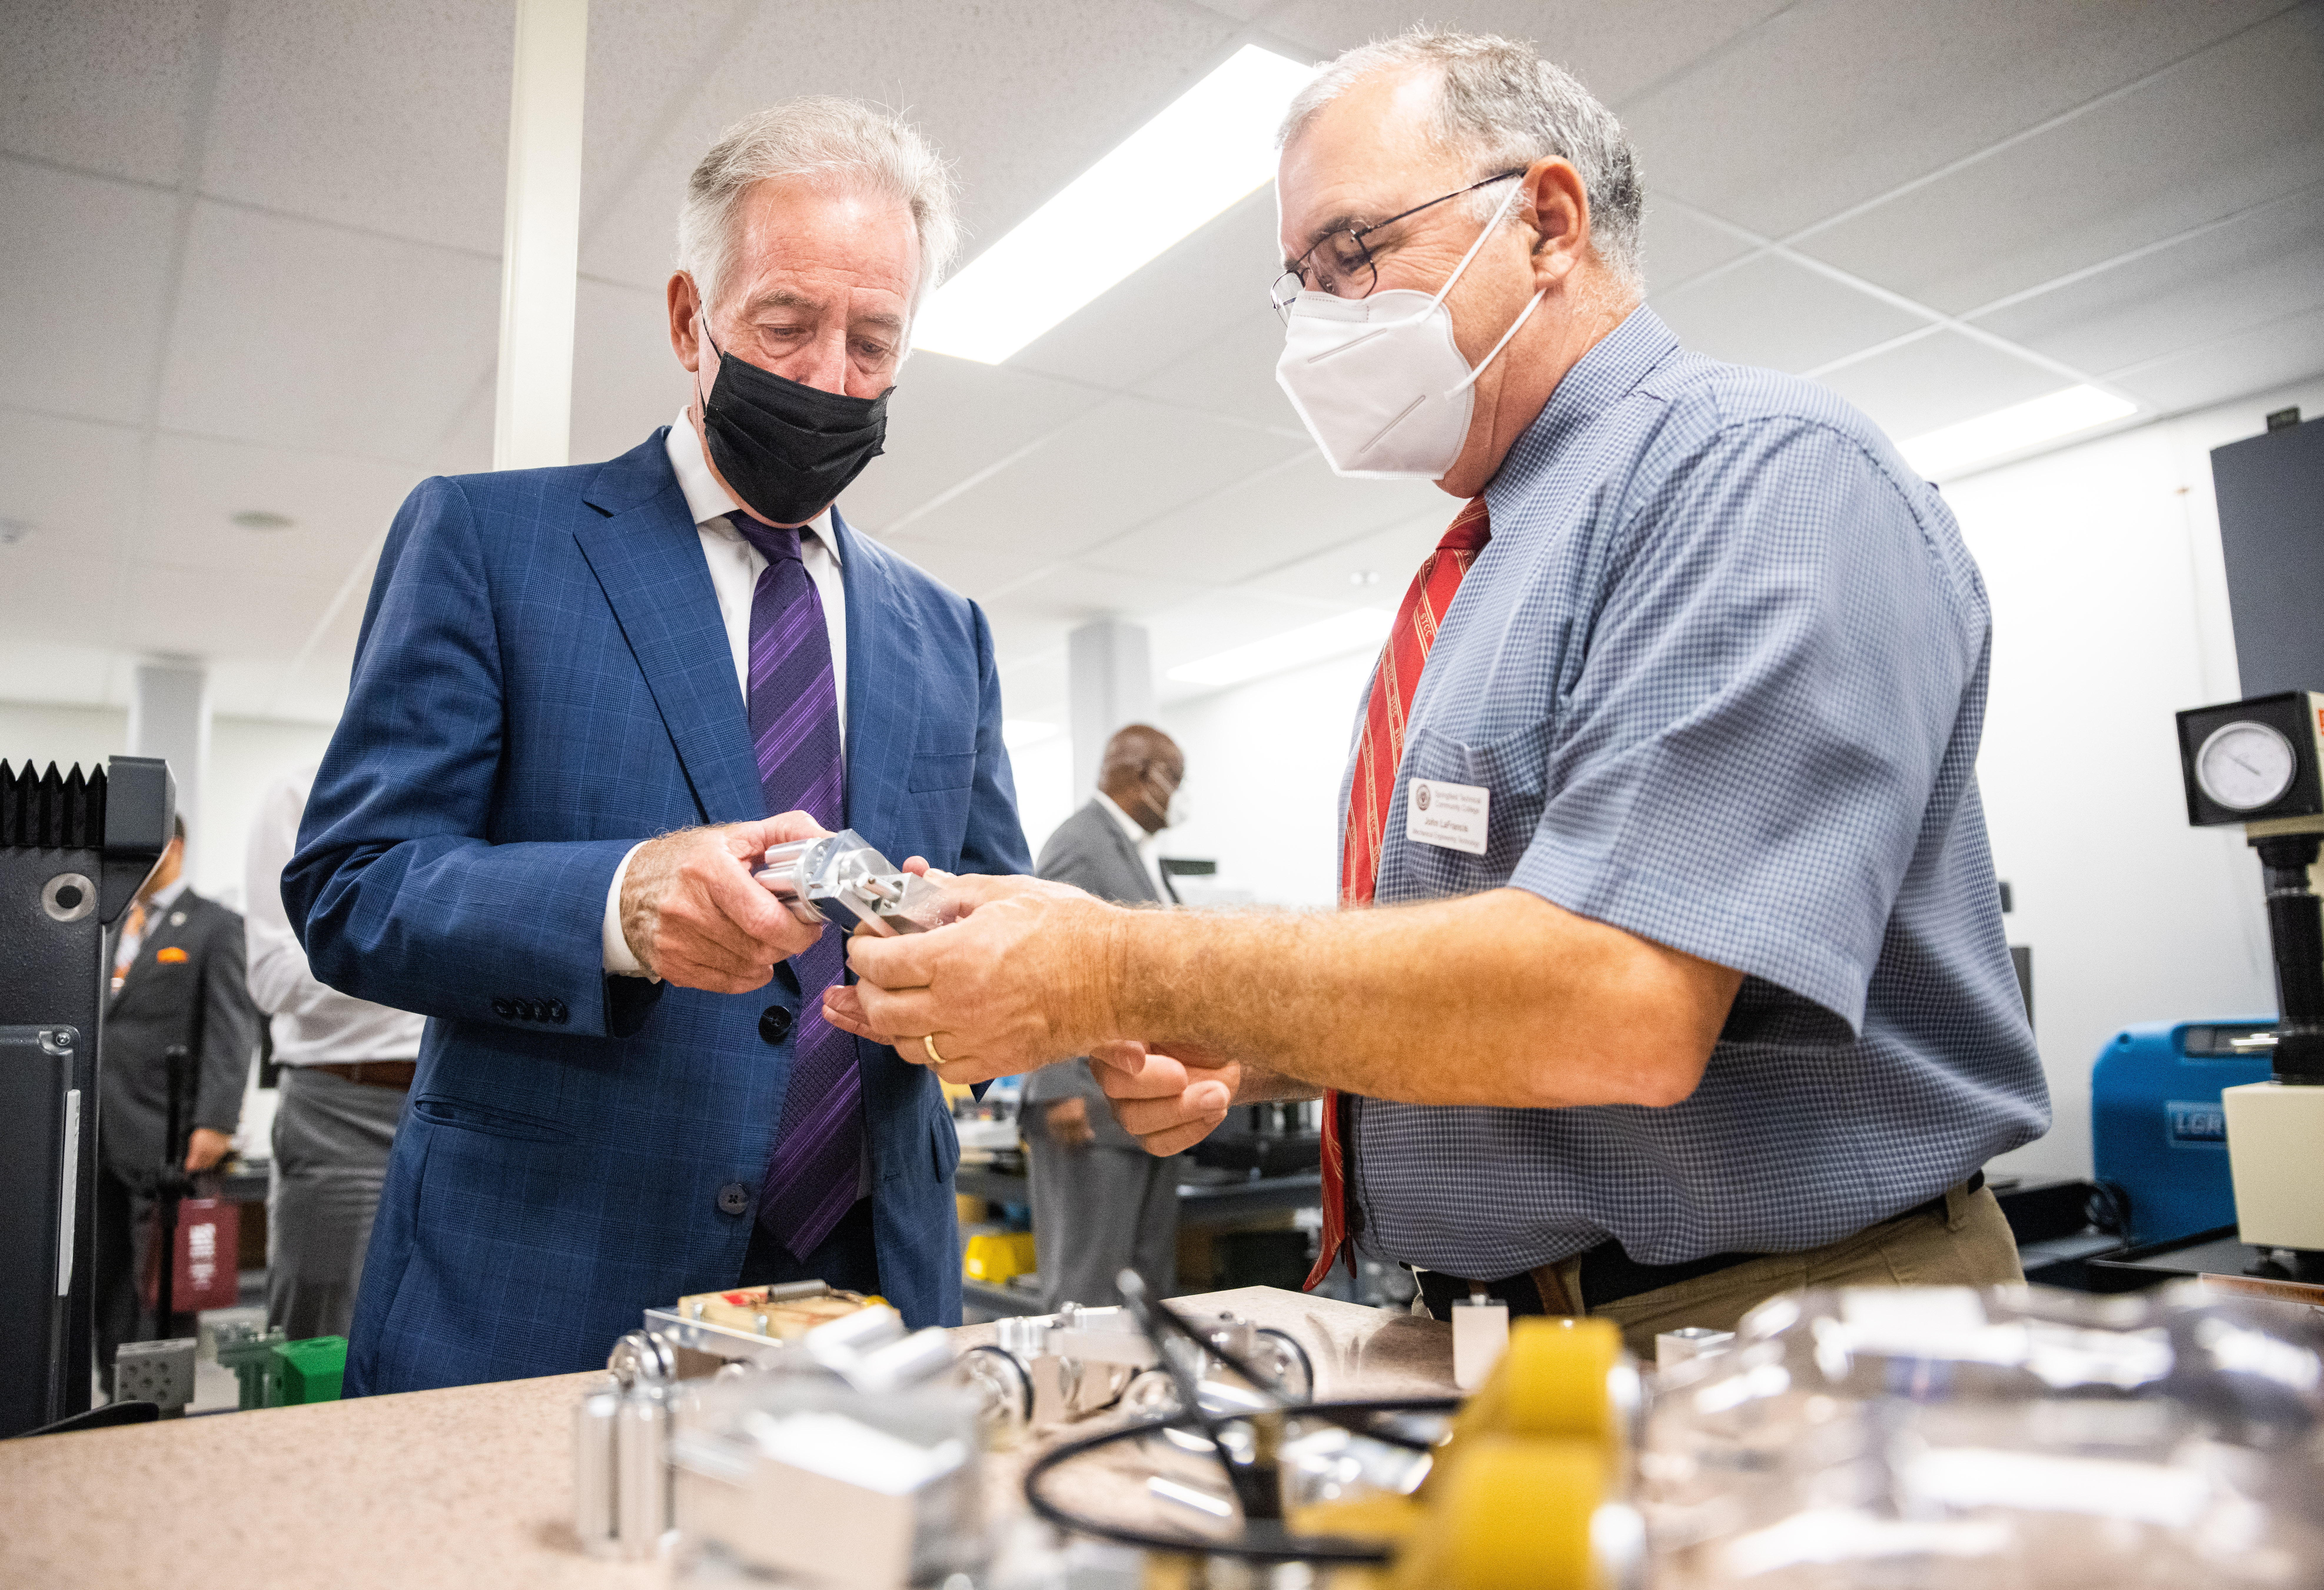 John LaFrancis, Mechanical Engineering Technology professor at Springfield Technical Community College, right, shows parts manufactured at the college's shop to U.S. Rep Richard E. Neal, left, during a tour on Thursday, Oct. 6, 2021. (Hoang ‘Leon’ Nguyen / The Republican)